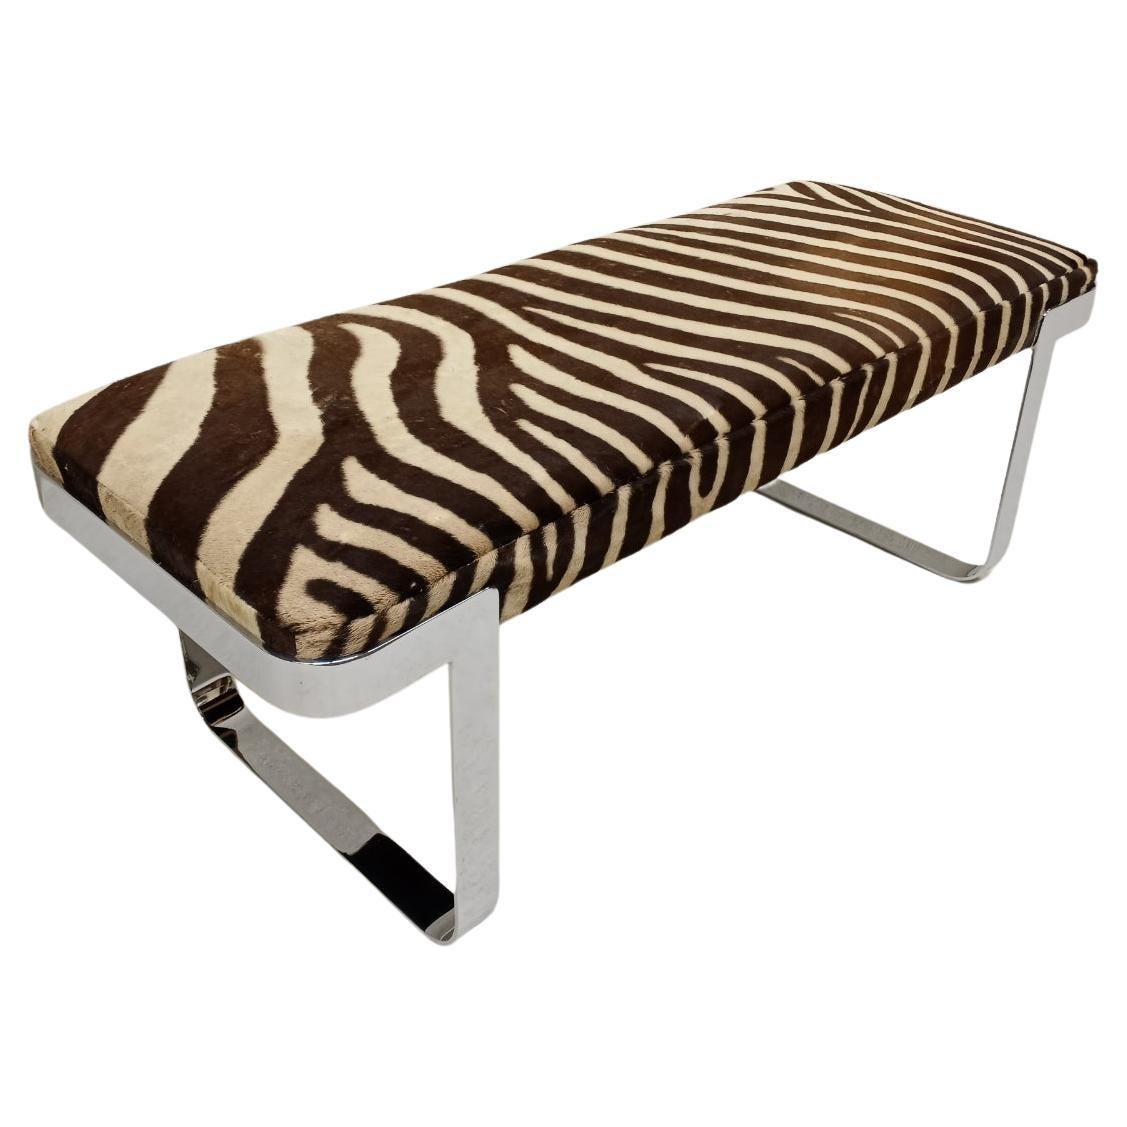 Mid-Century Modern Chrome Bench by Tri Mark Newly Upholstered in Zebra Hide